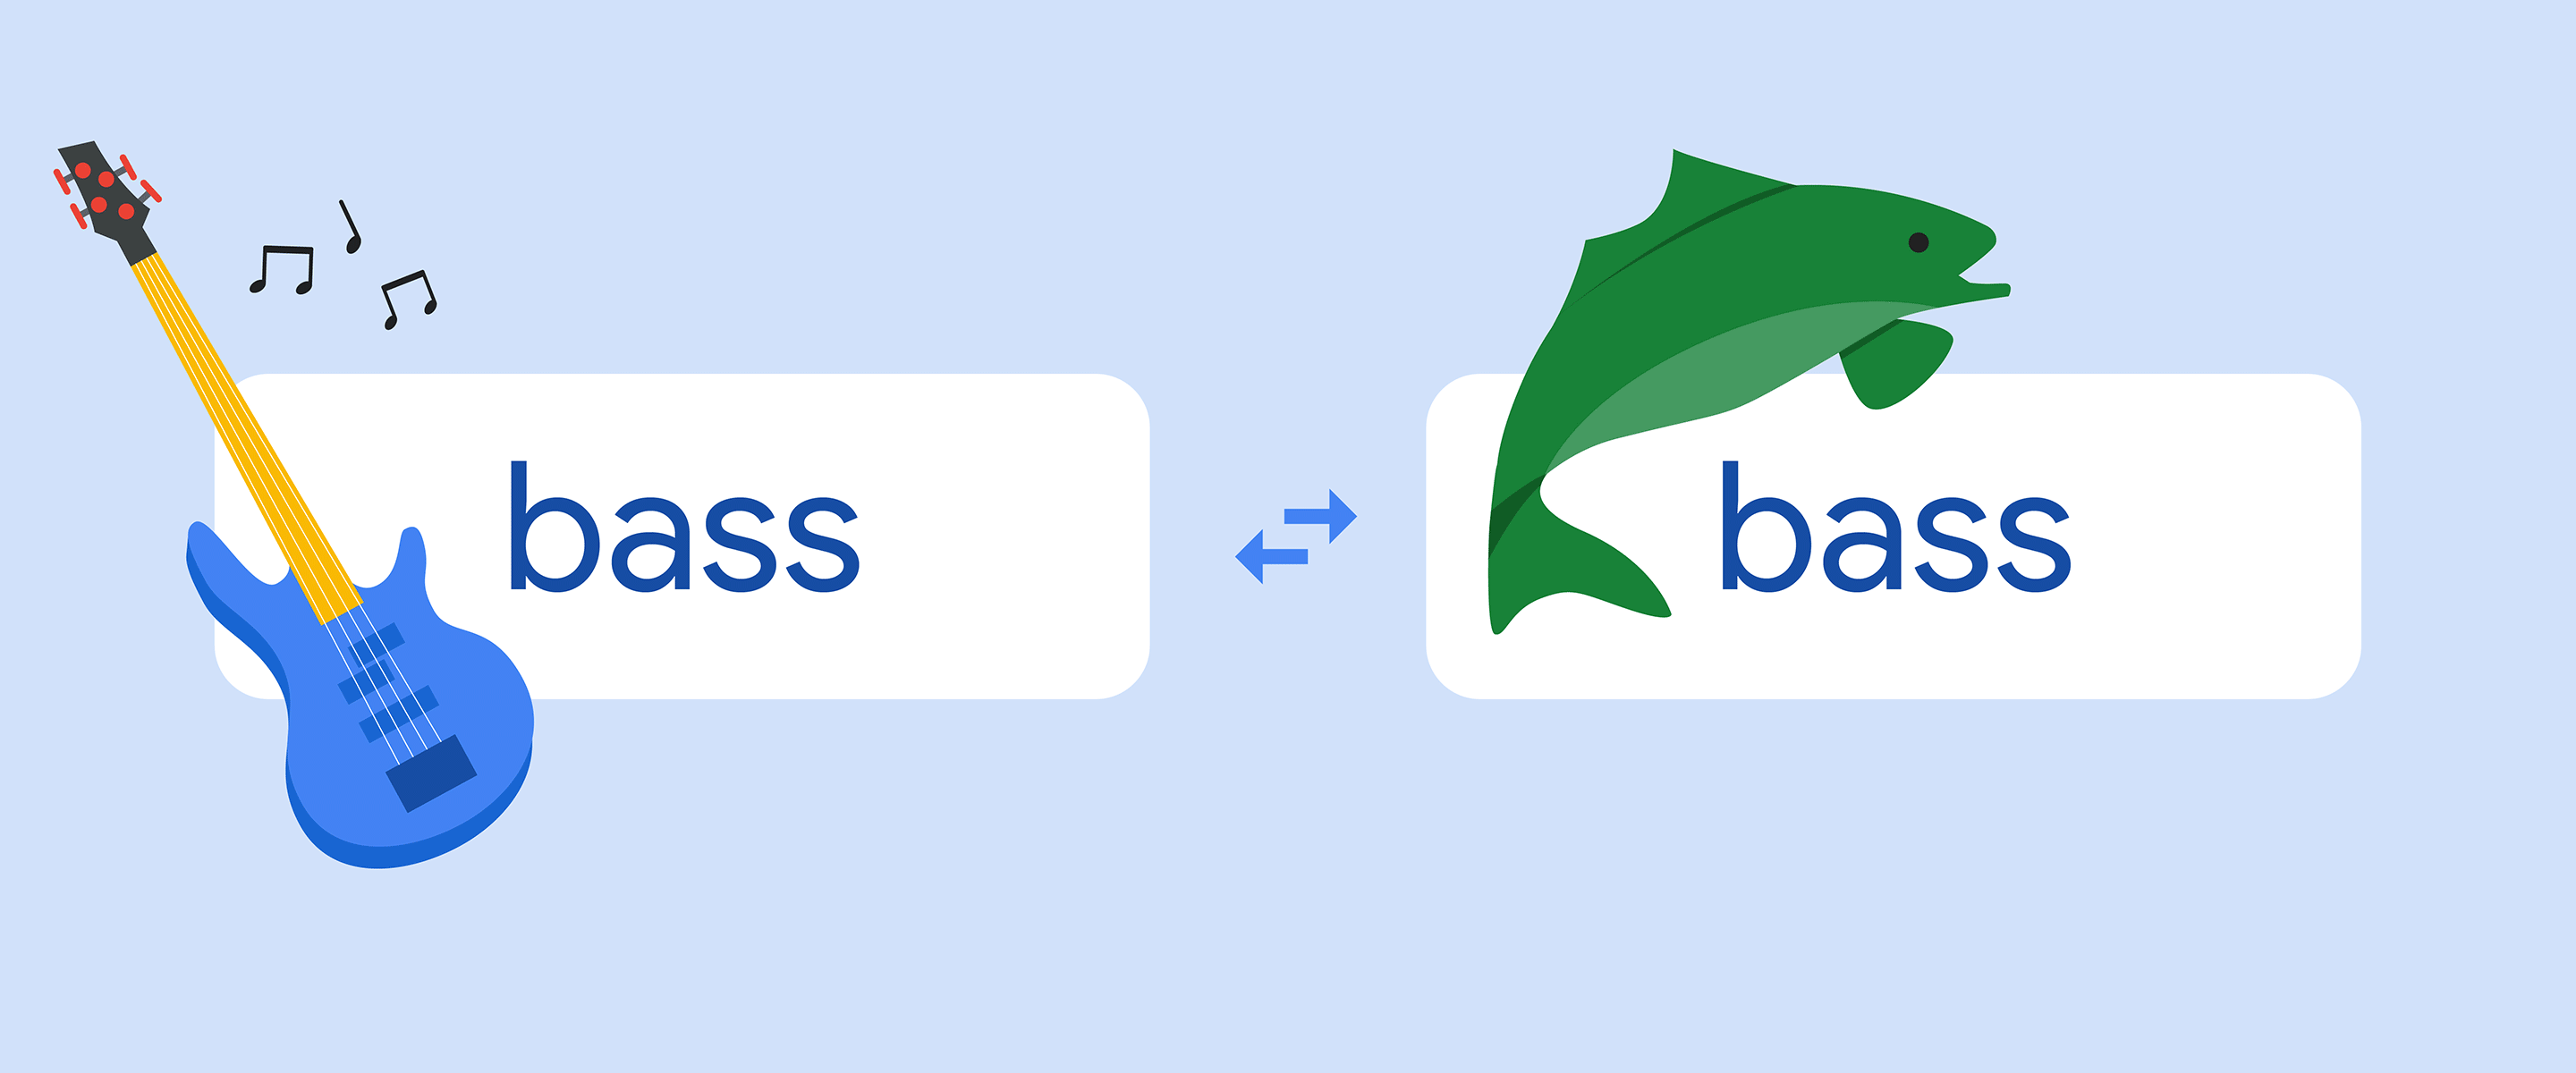 Animated GIF with a Translate-like box that flashes between different homonyms, like “medium and medium” and “bass and bass” and as it flashes between them it includes different icons of each word with its different meaning.